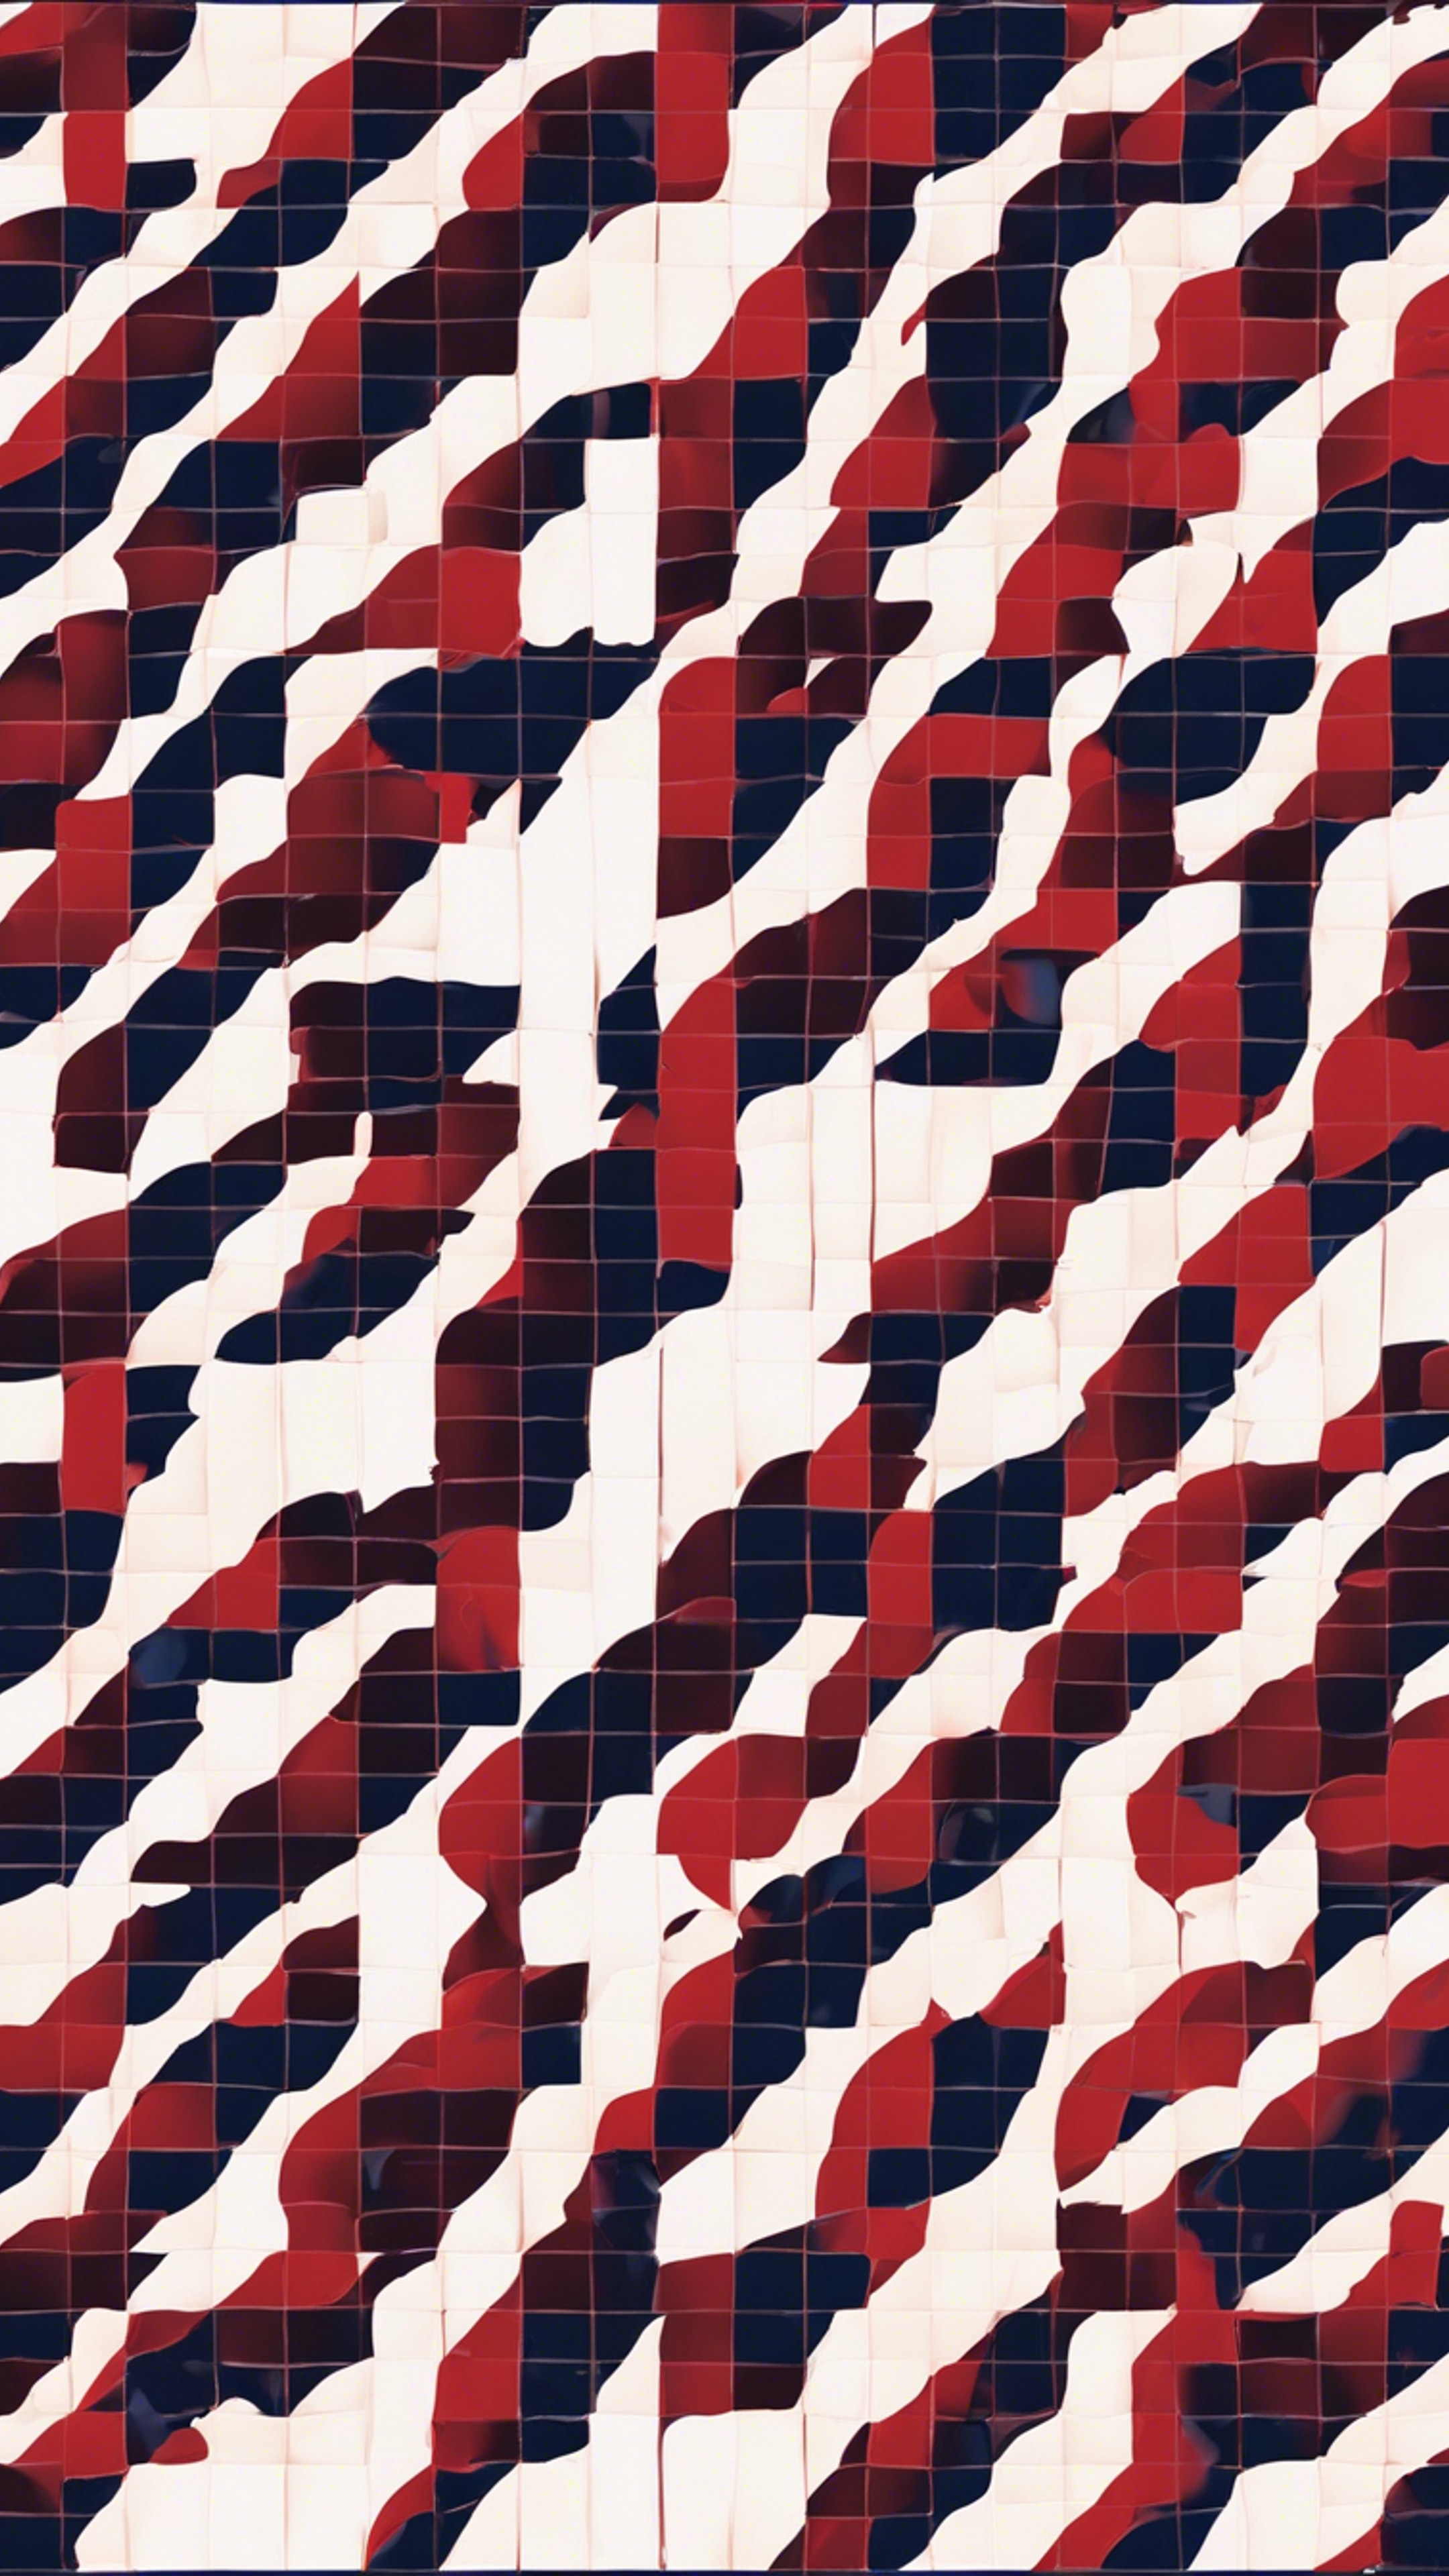 A seamless pattern of red and navy checks in large squares.壁紙[9c6dc6d172a14b67b0c5]